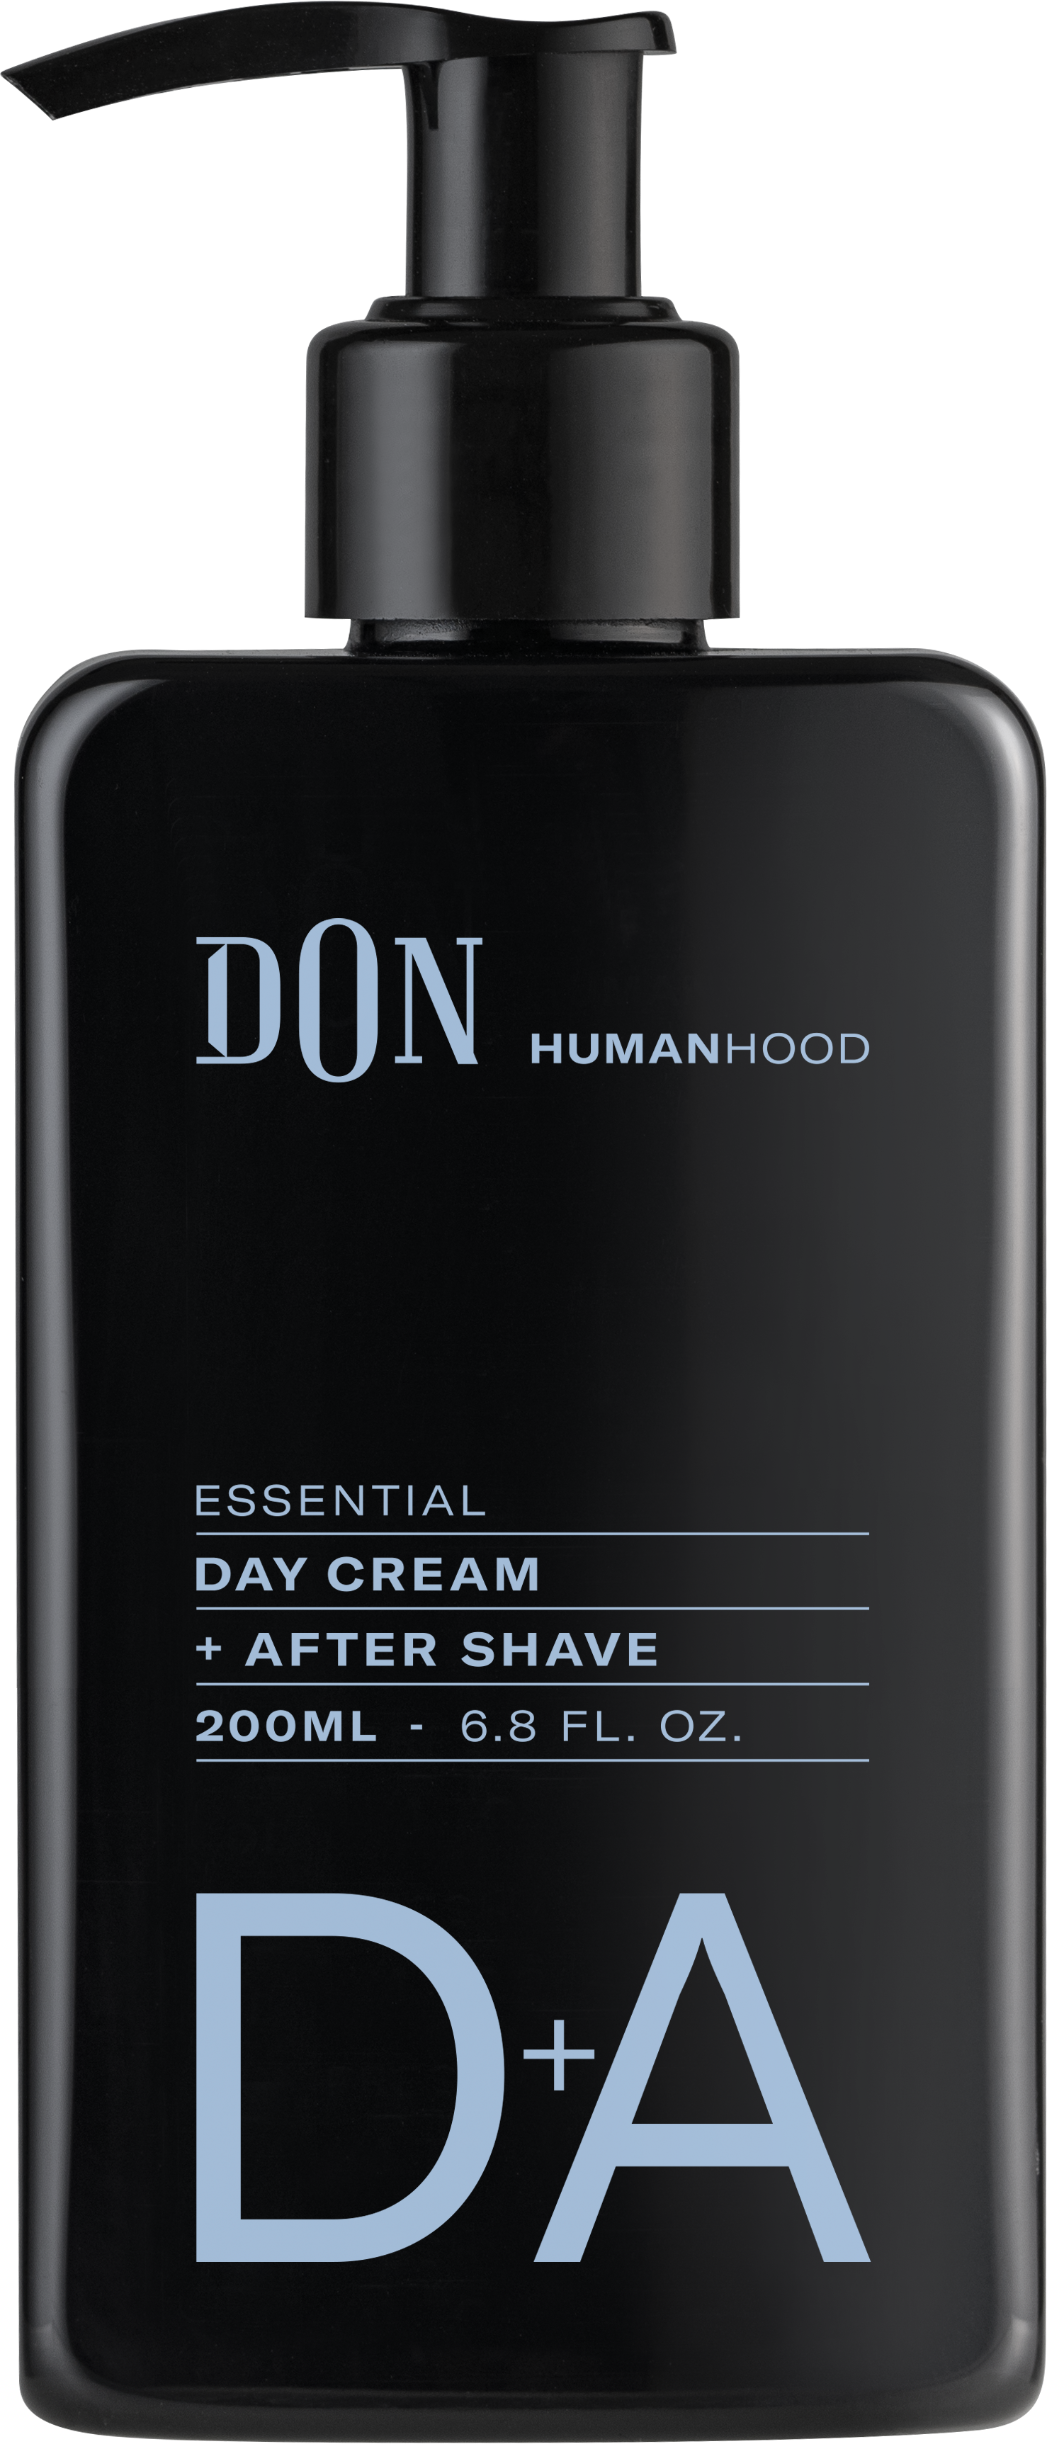 DON HUMANHOOD - ESSENTIAL DAY CREAM & AFTER SHAVE